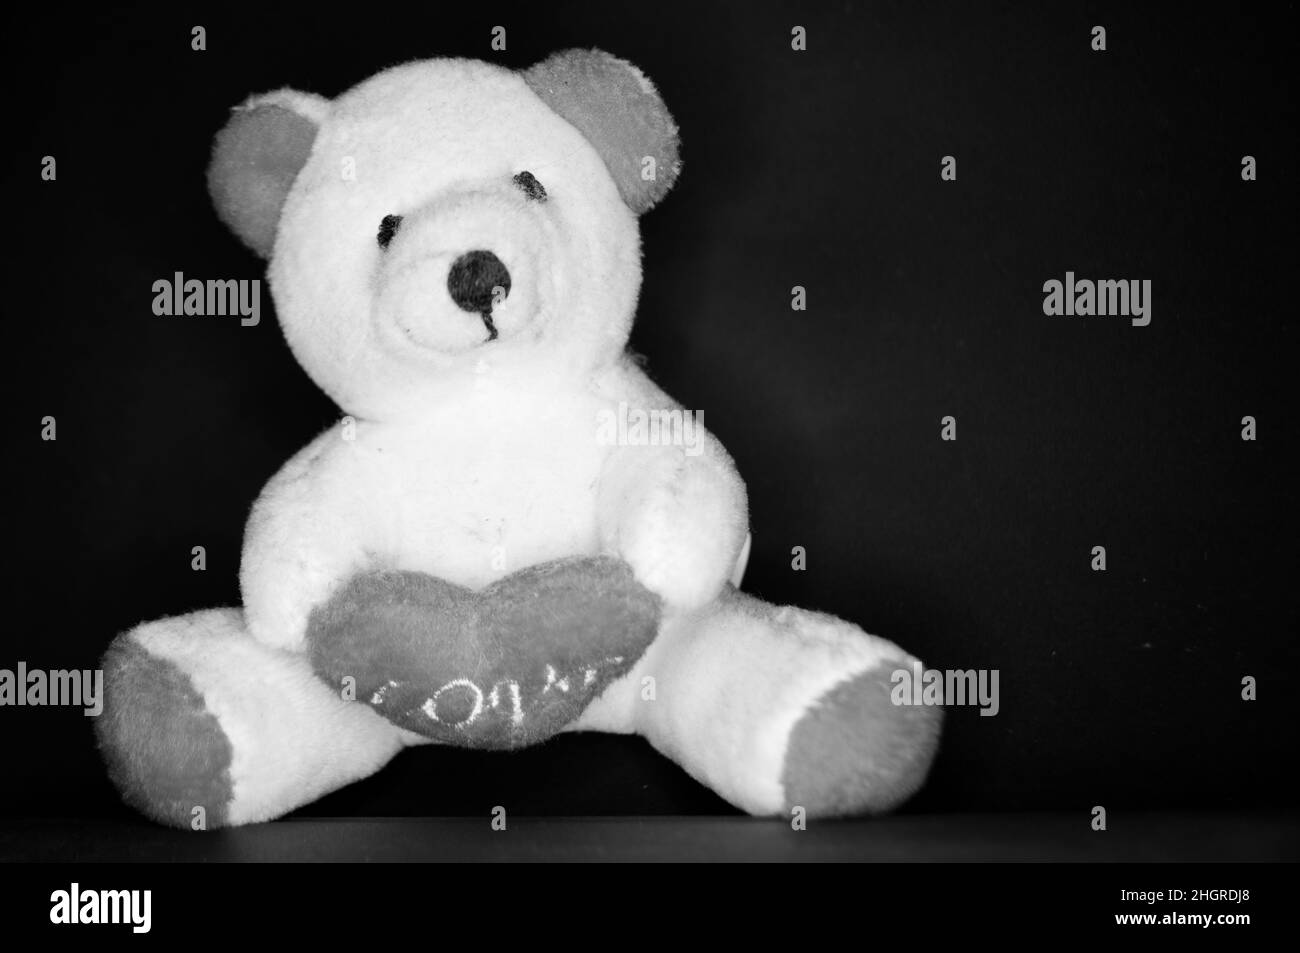 the teddy bear with the heart to congratulate the day of lovers Stock Photo